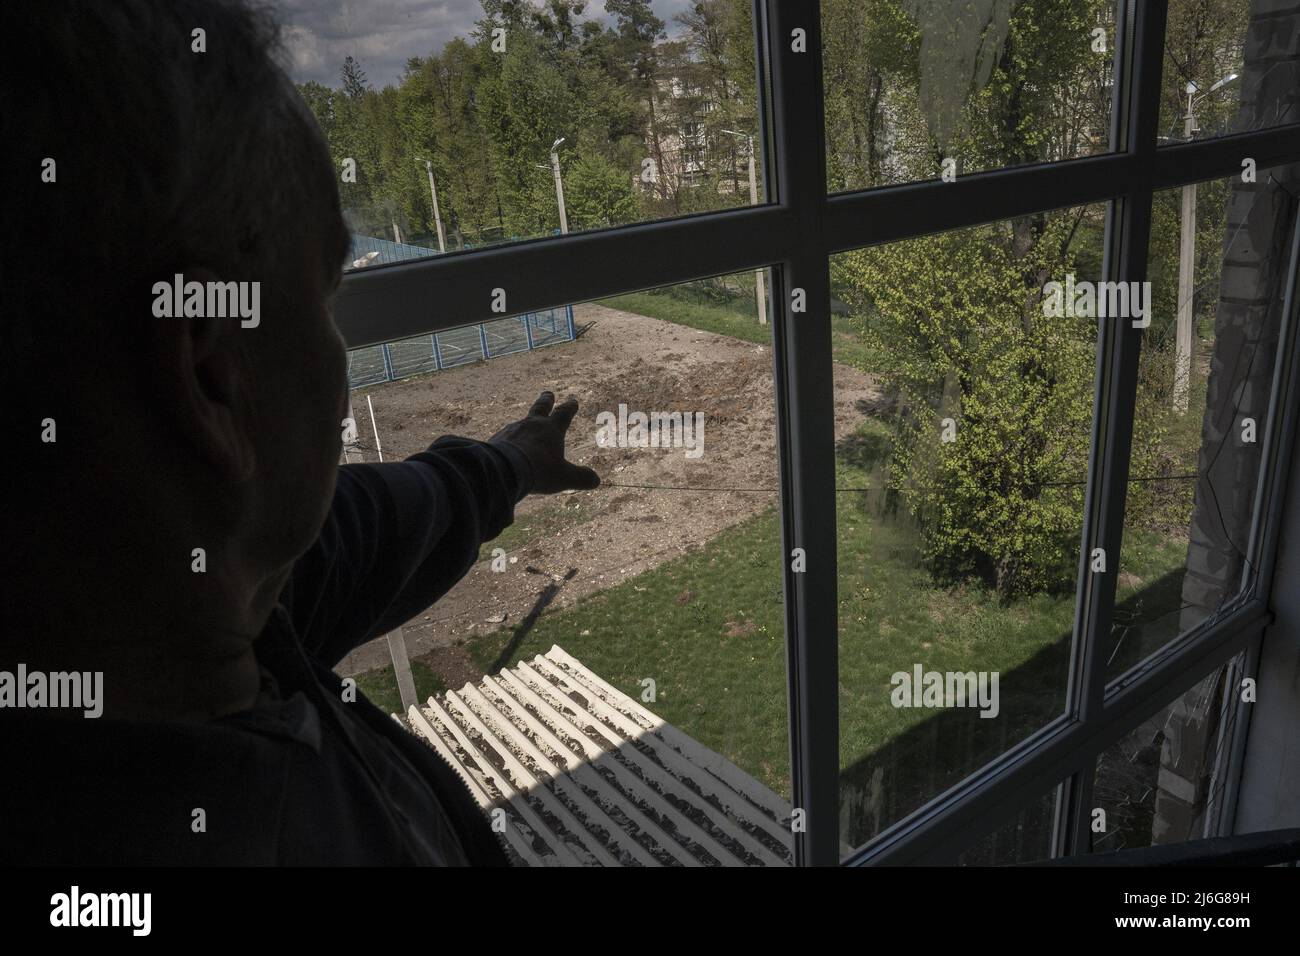 Alexander Grigorevich Gryanik, 67, Principle of No. 62 School, points to a crater left by an artillery round fired from the Russians 10 kilometers away outside of Kharkiv, Ukraine, May 1, 2022.  Photo by Ken Cedeno/UPI . Credit: UPI/Alamy Live News Stock Photo